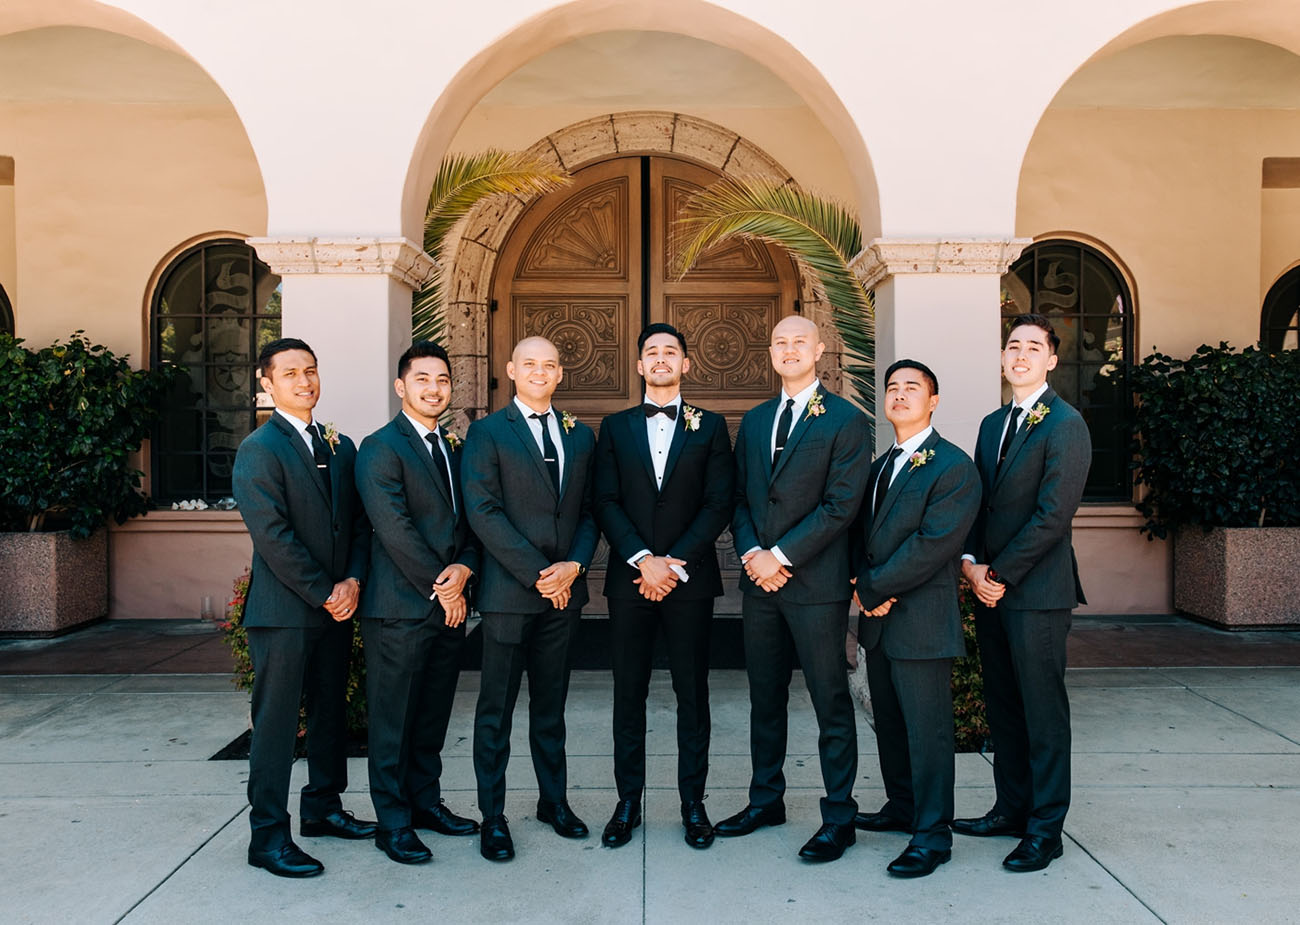 The groom was rocking and tuxedo and the groomsmen were wearing suits with ties